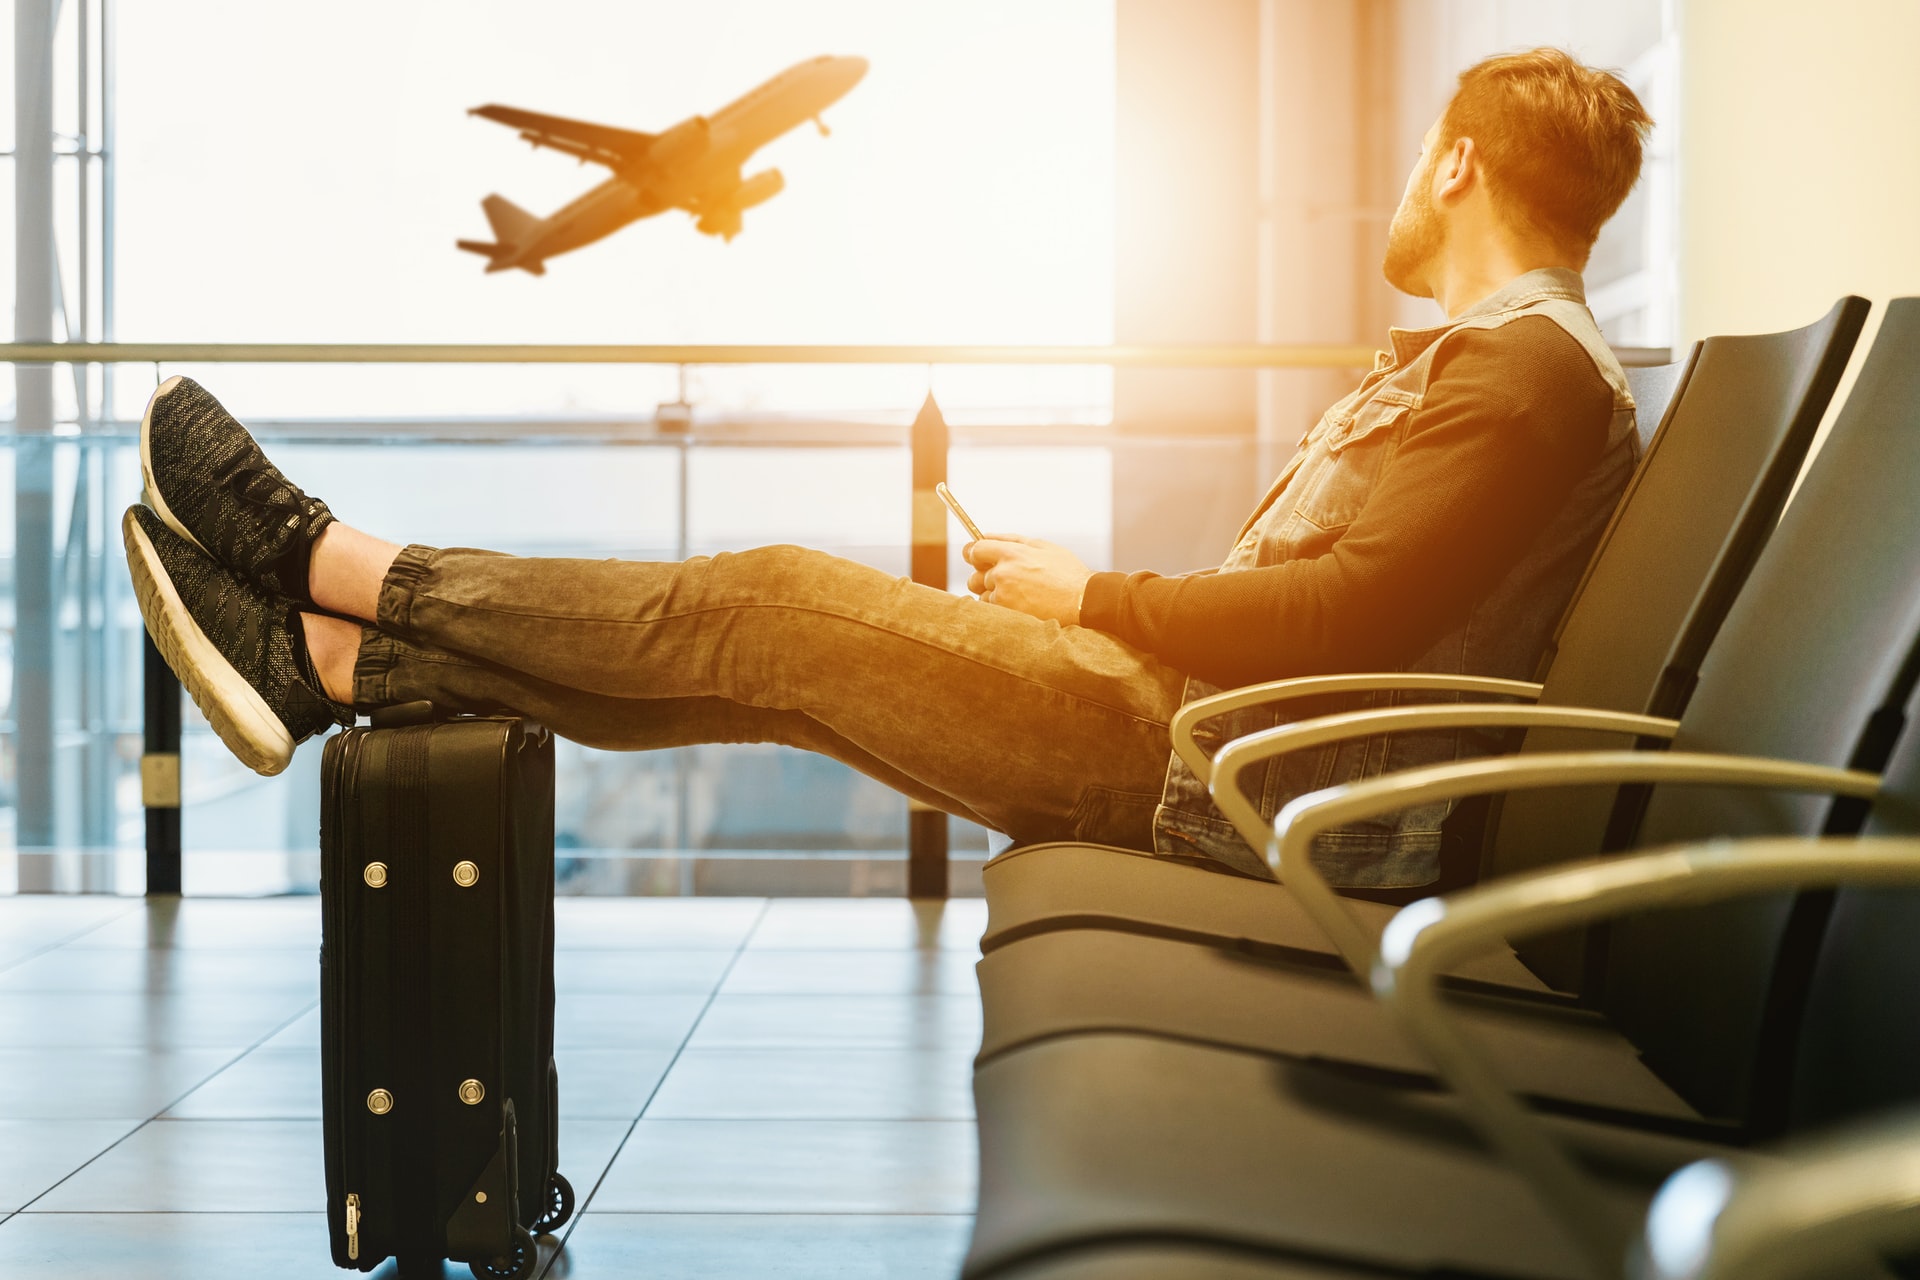 Tech Stacks in Application Development: The Travel Industry